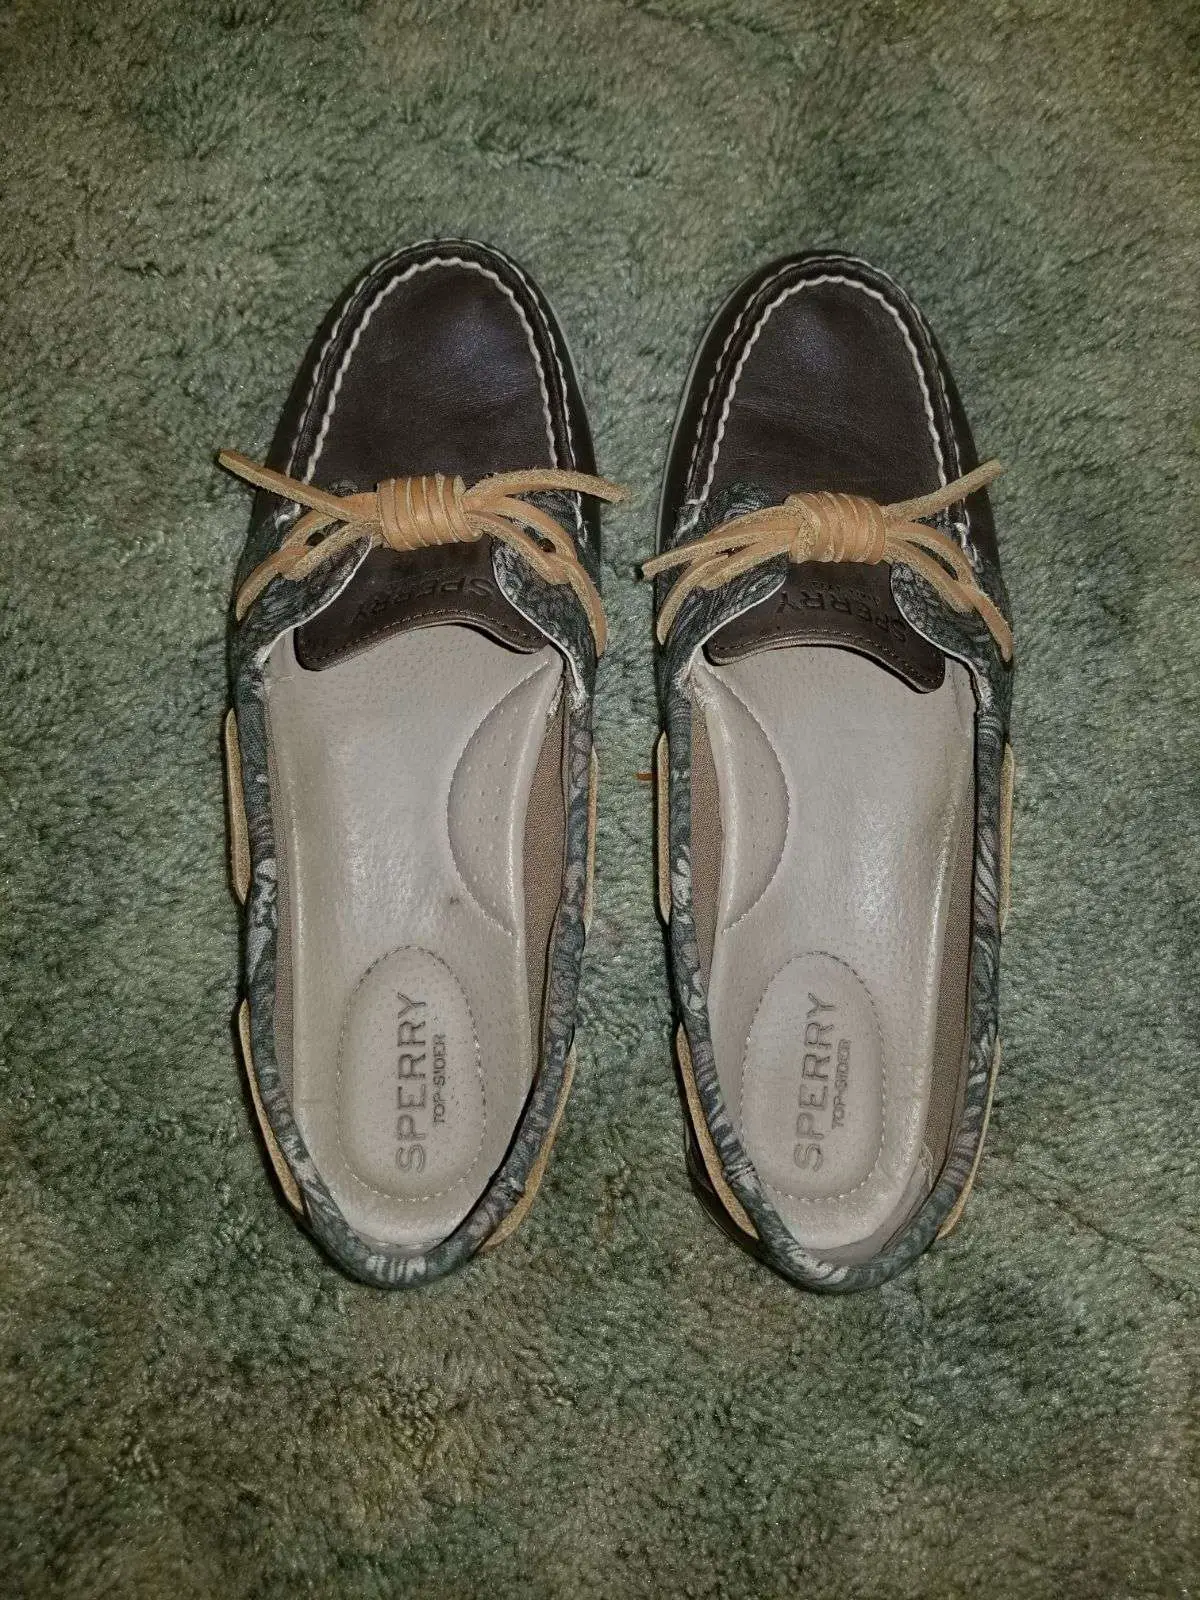 Been worn but not much. Condition is basically new. No ...